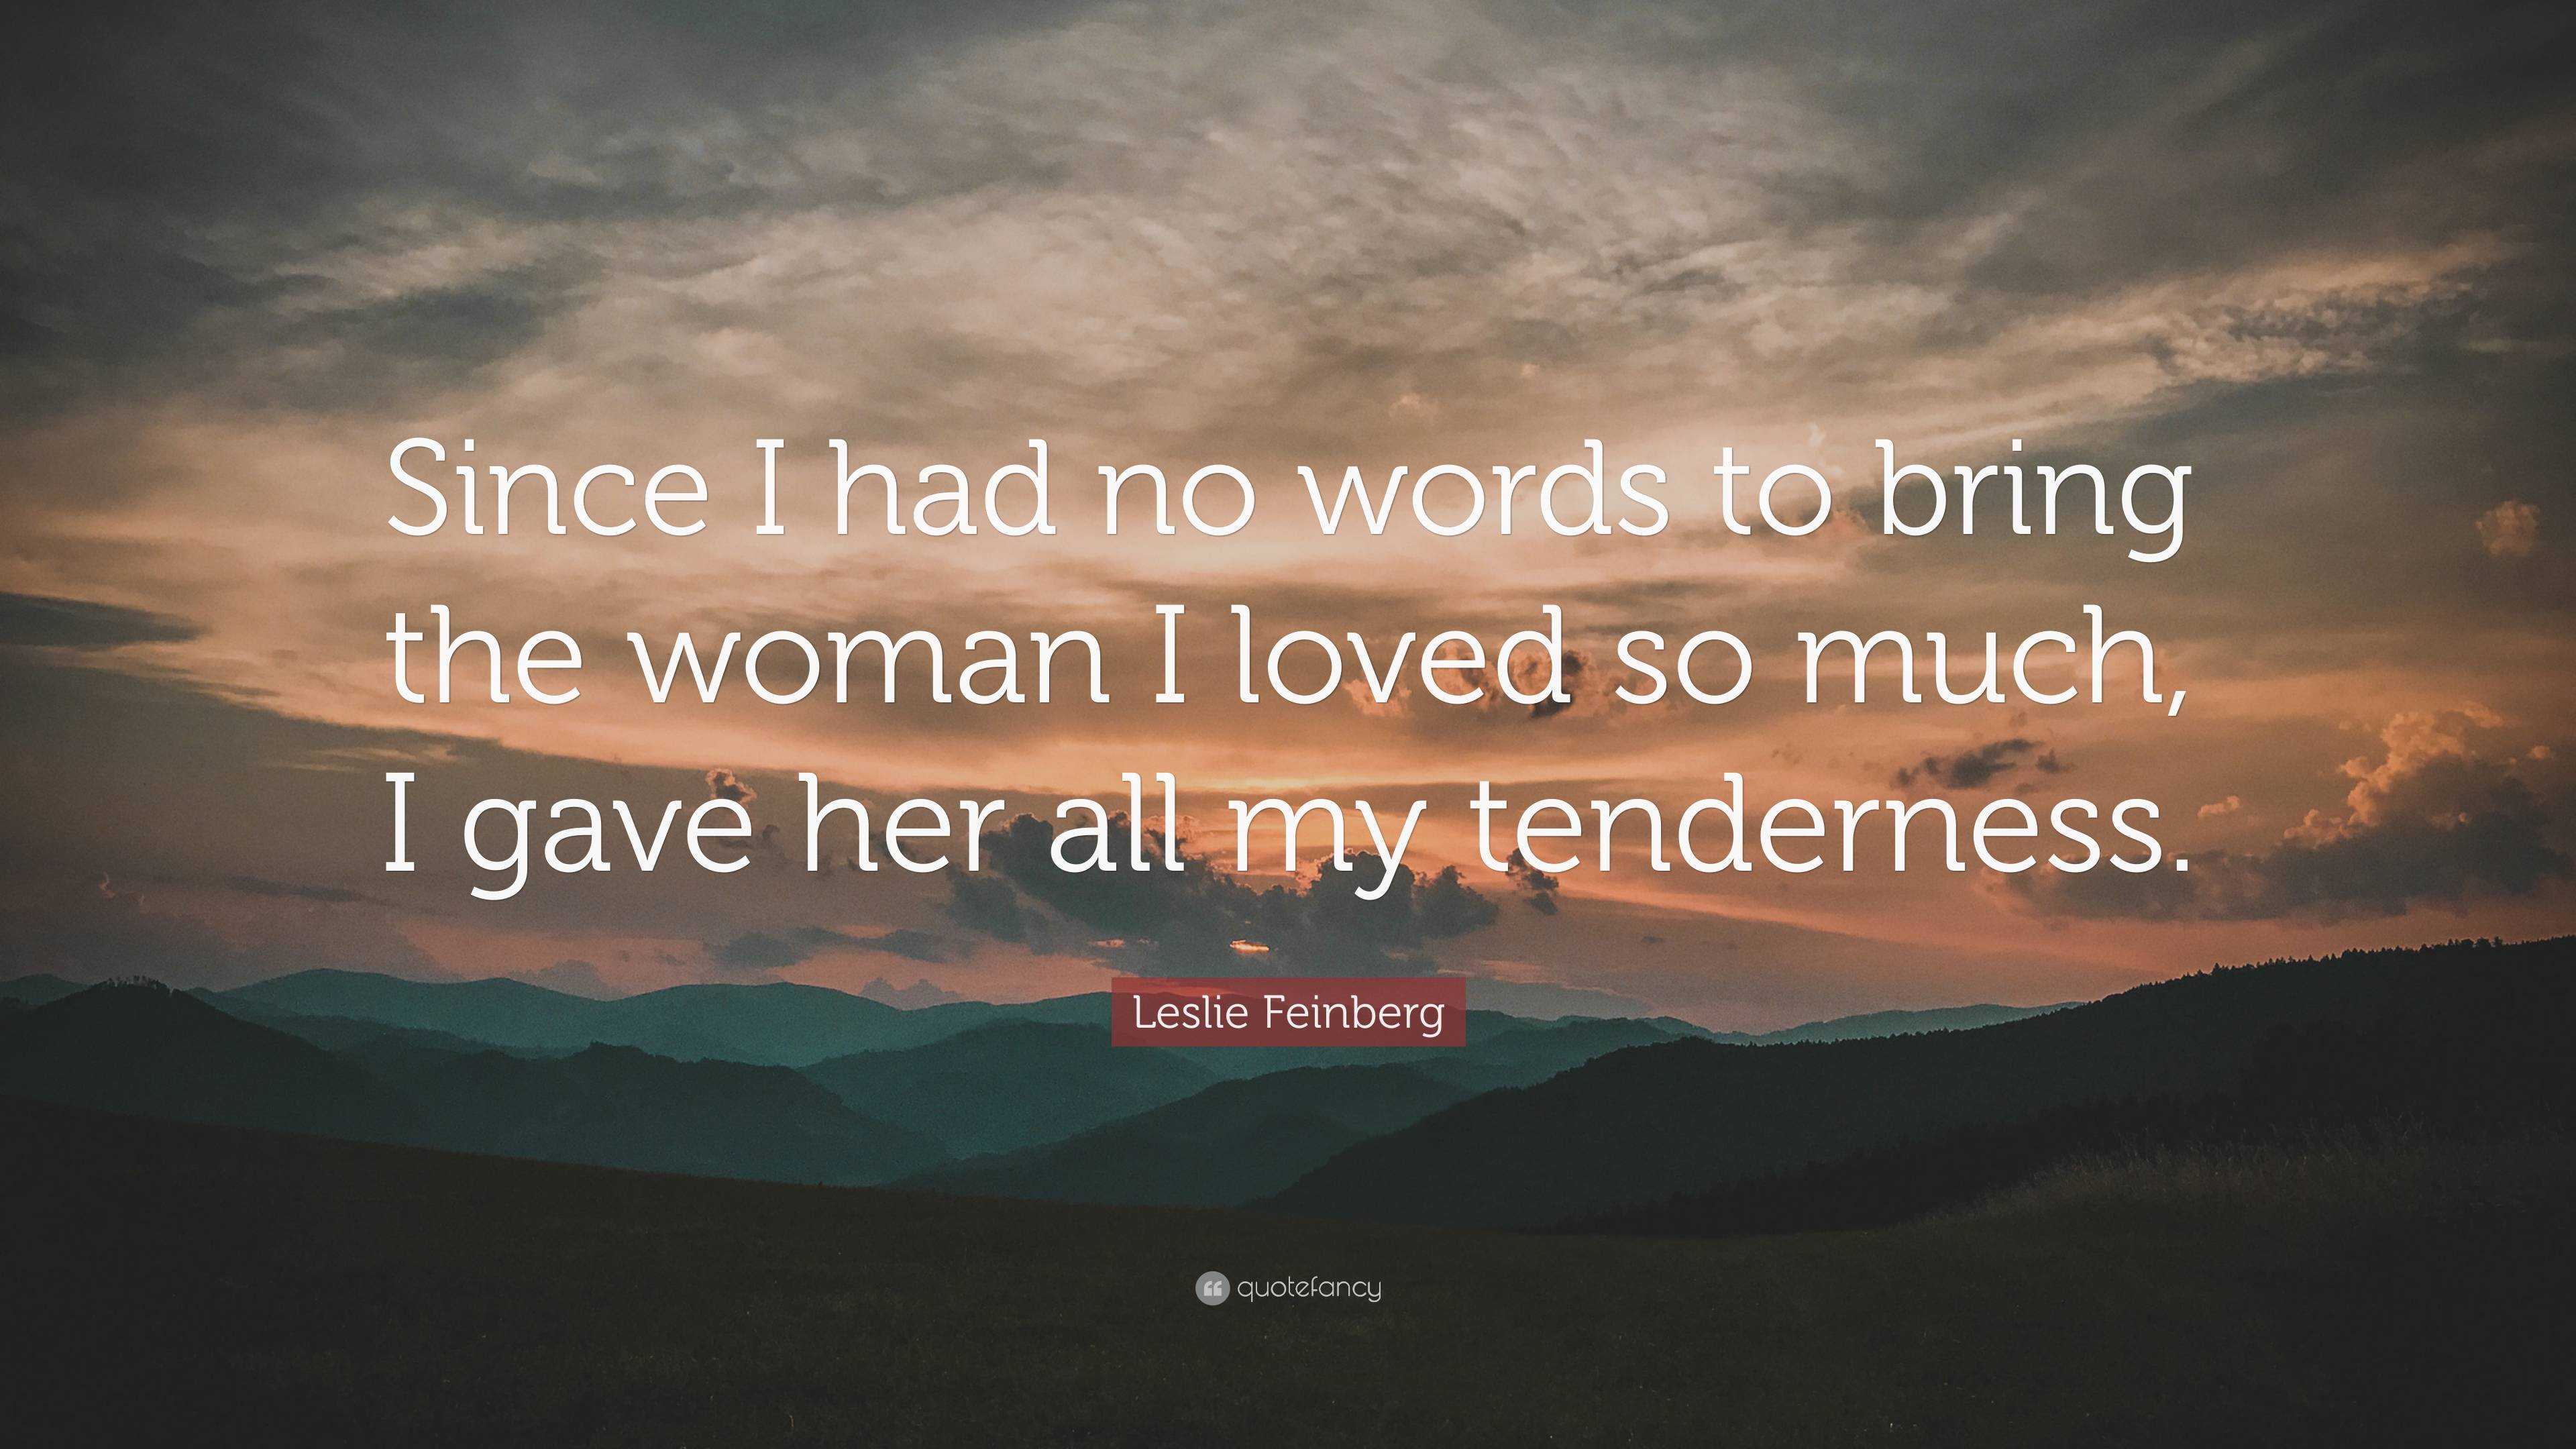 Leslie Feinberg Quote: “Since I had no words to bring the woman I loved ...